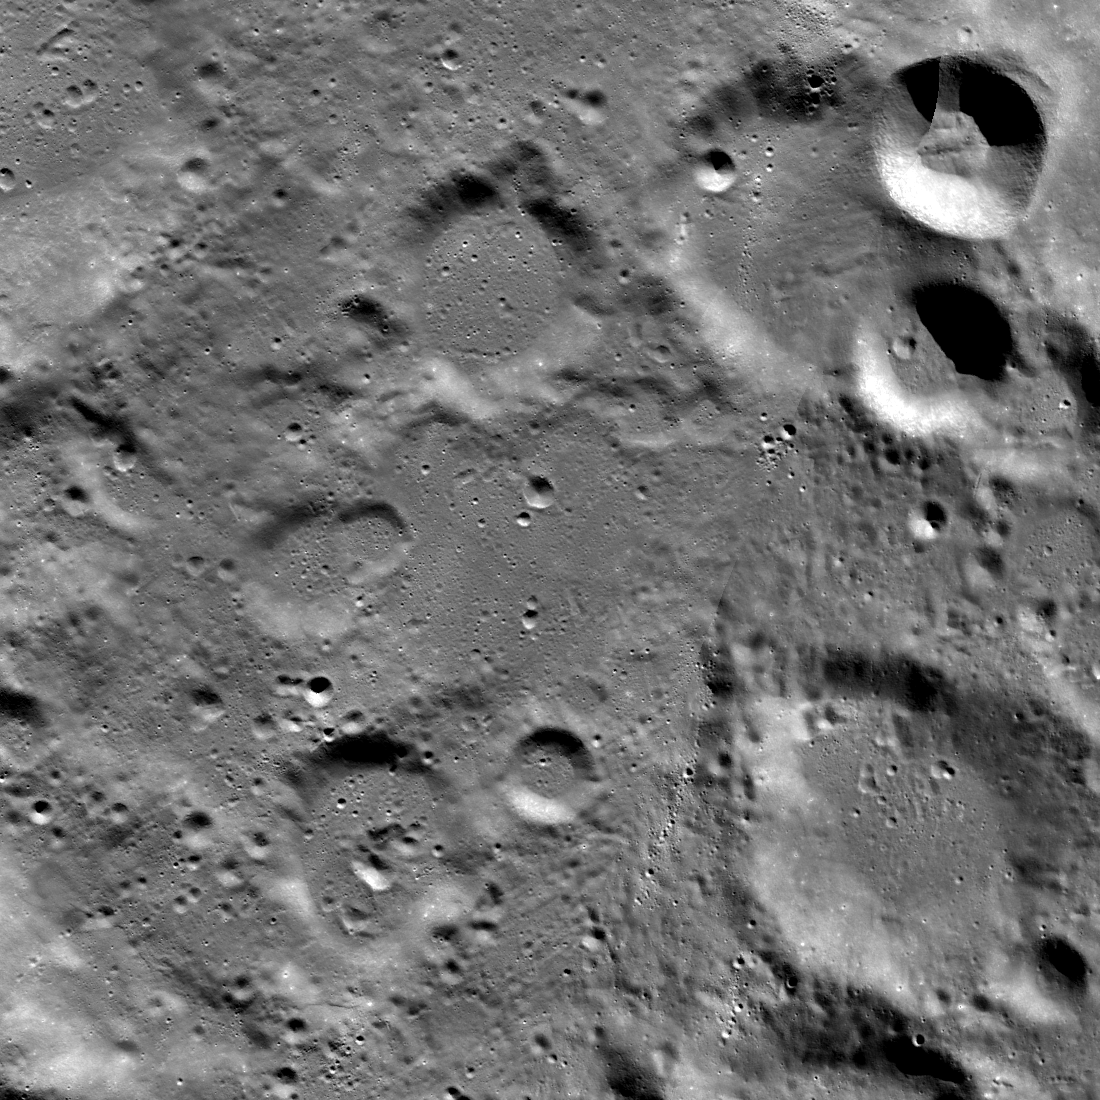 Moon with craters